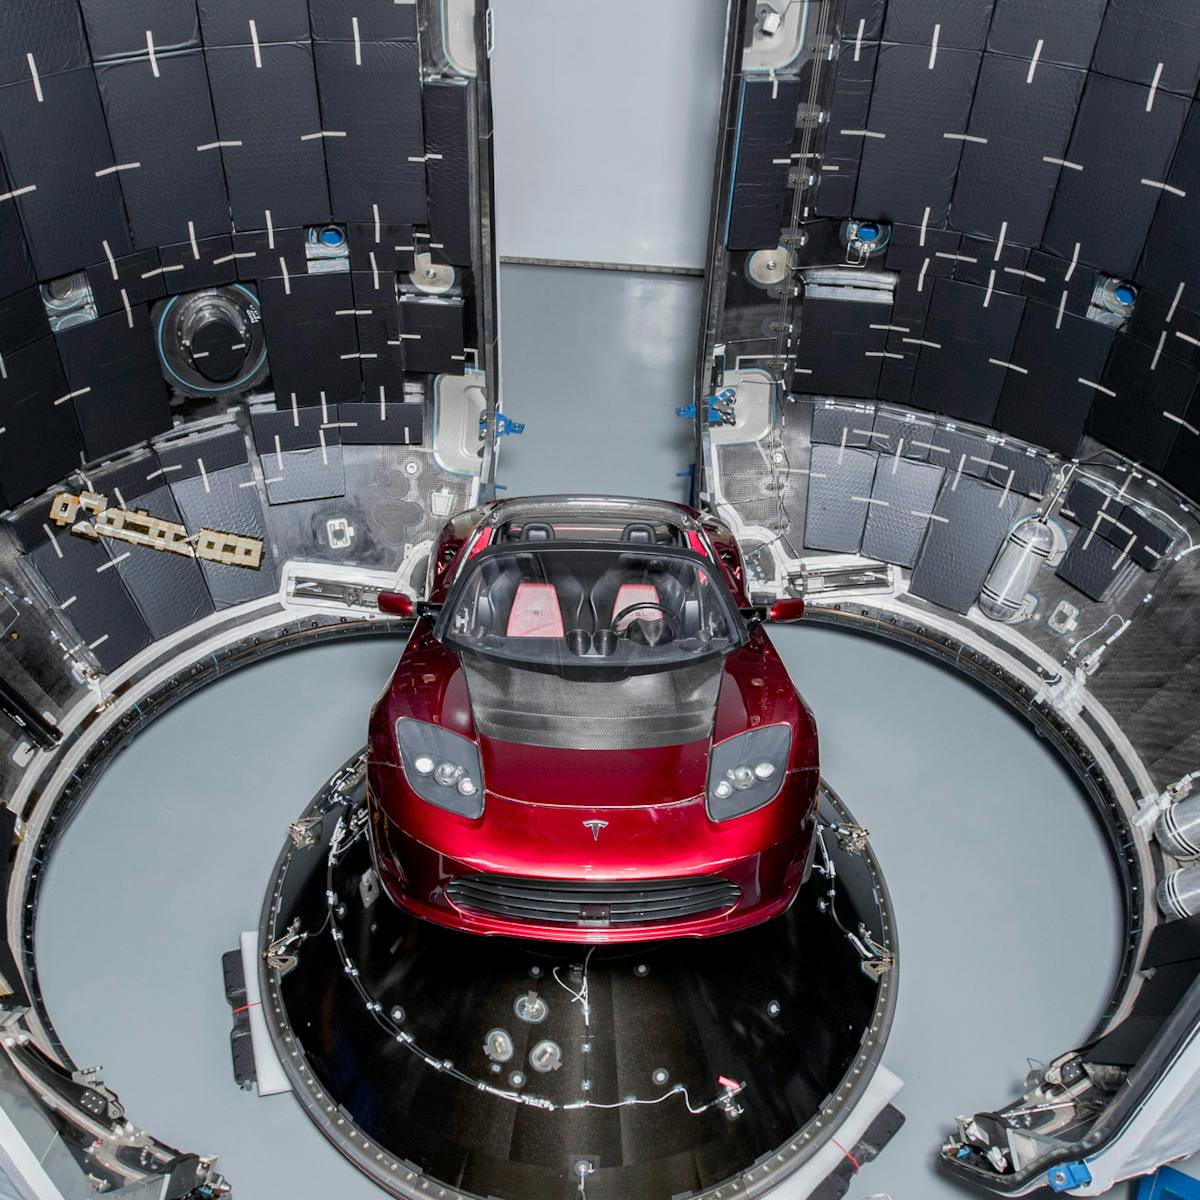 Elon Musk is launching a Tesla into space – here's how SpaceX will do it